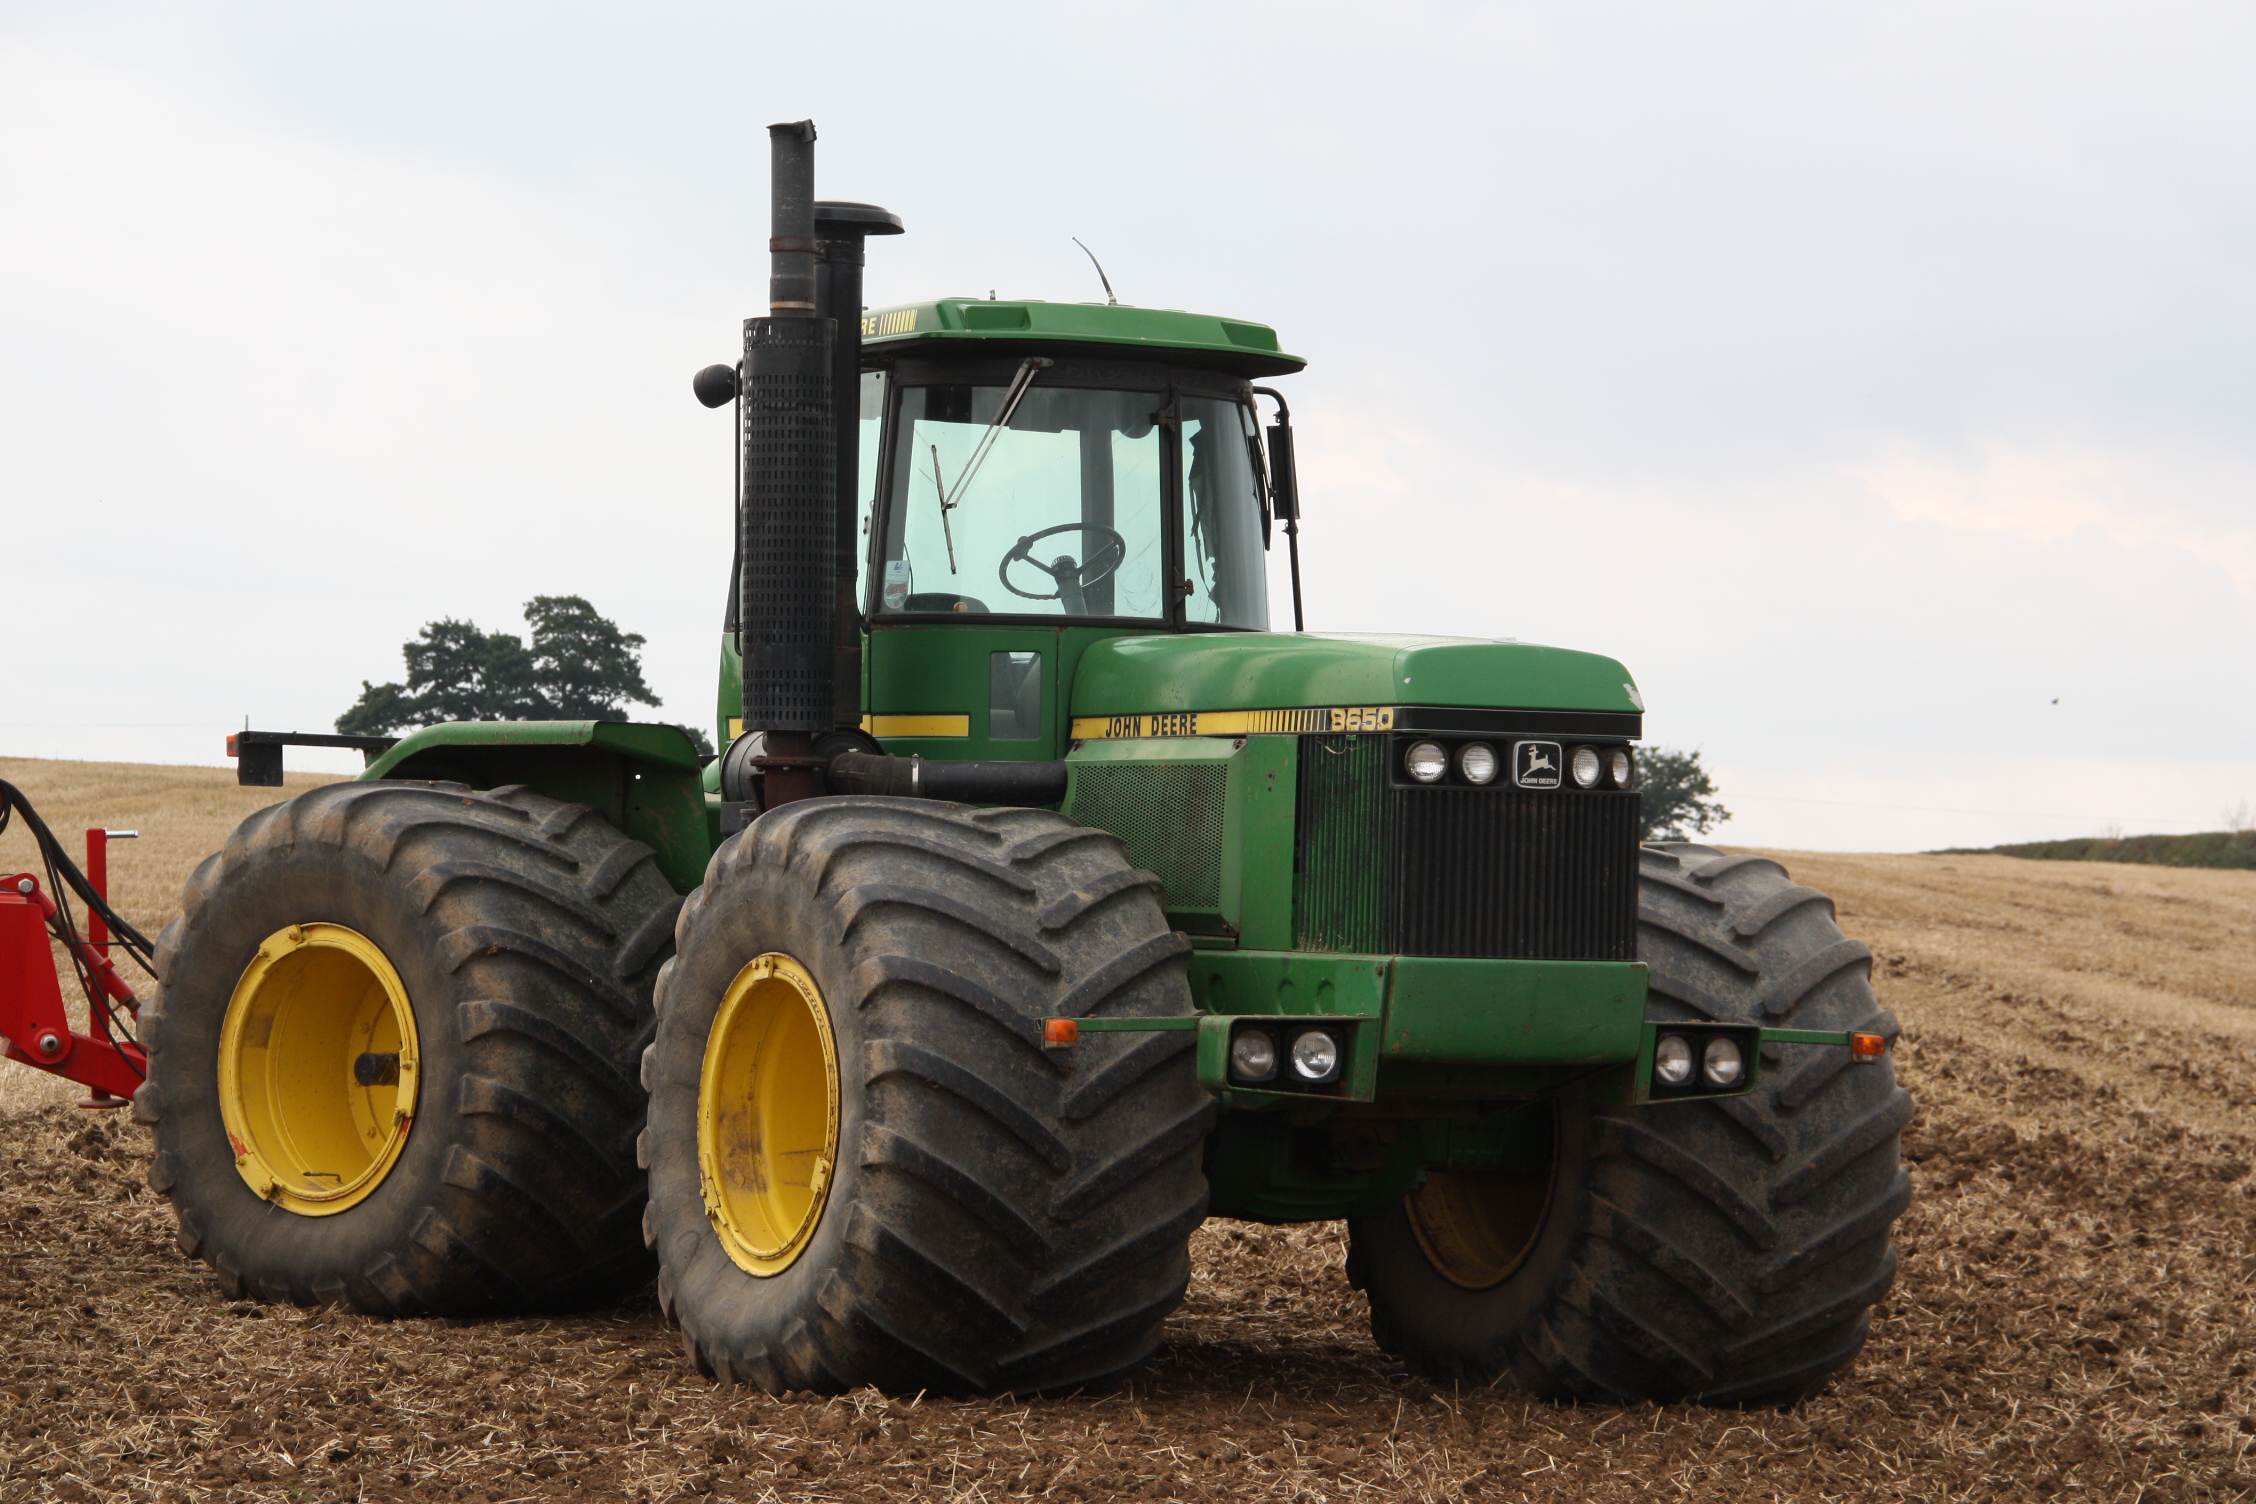 john deere 8650 - tractor & construction plant wiki - the